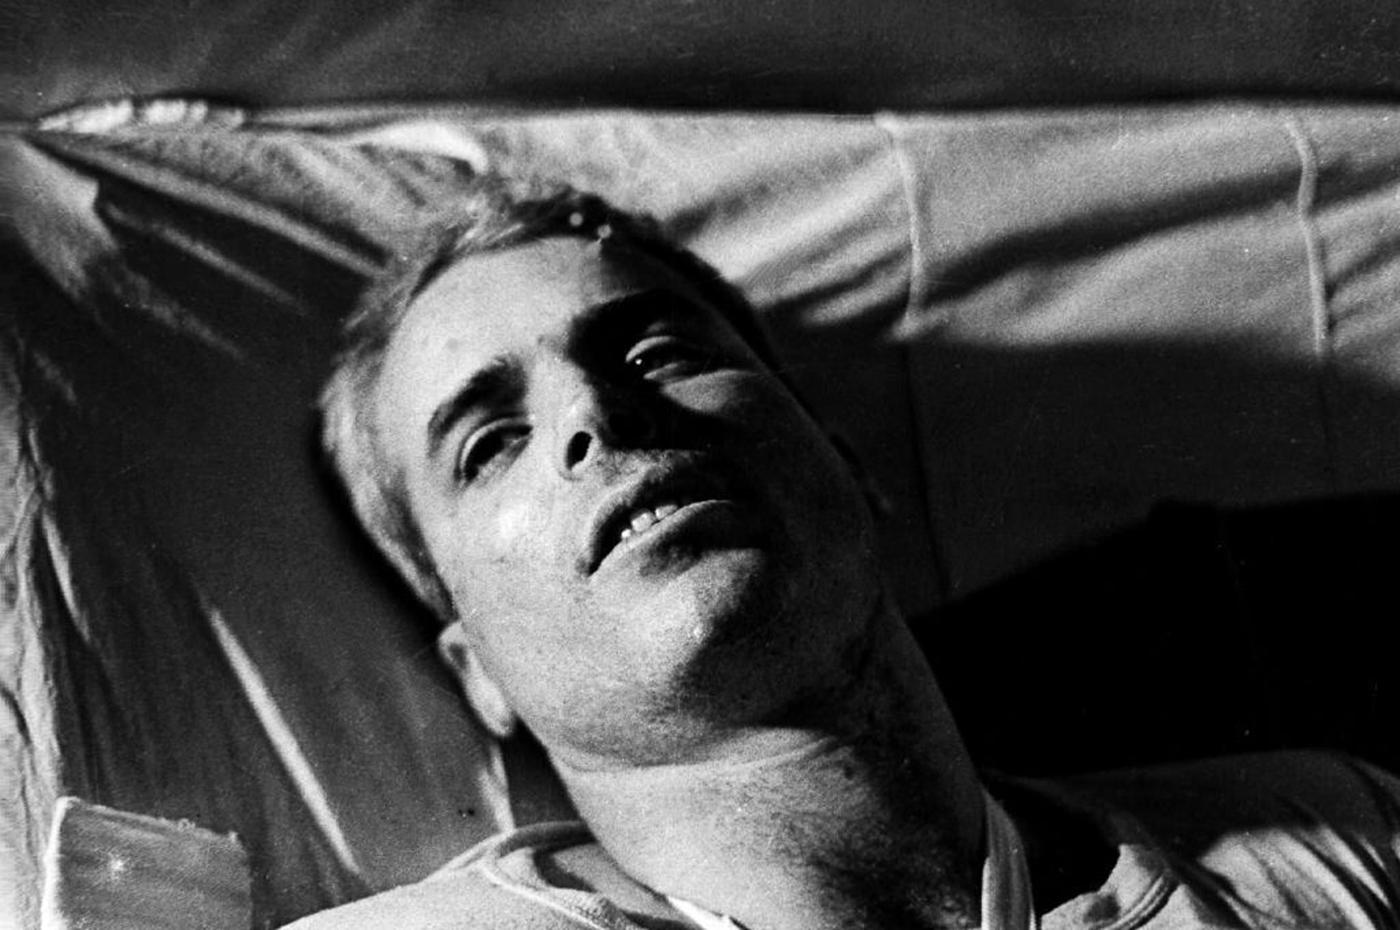 U.S. Navy Air-force Major John McCain lies on a bed in a Hanoi hospital as he was being given medical care for his injuries in Hanoi, Vietnam in 1967. (AFP/Getty Images)